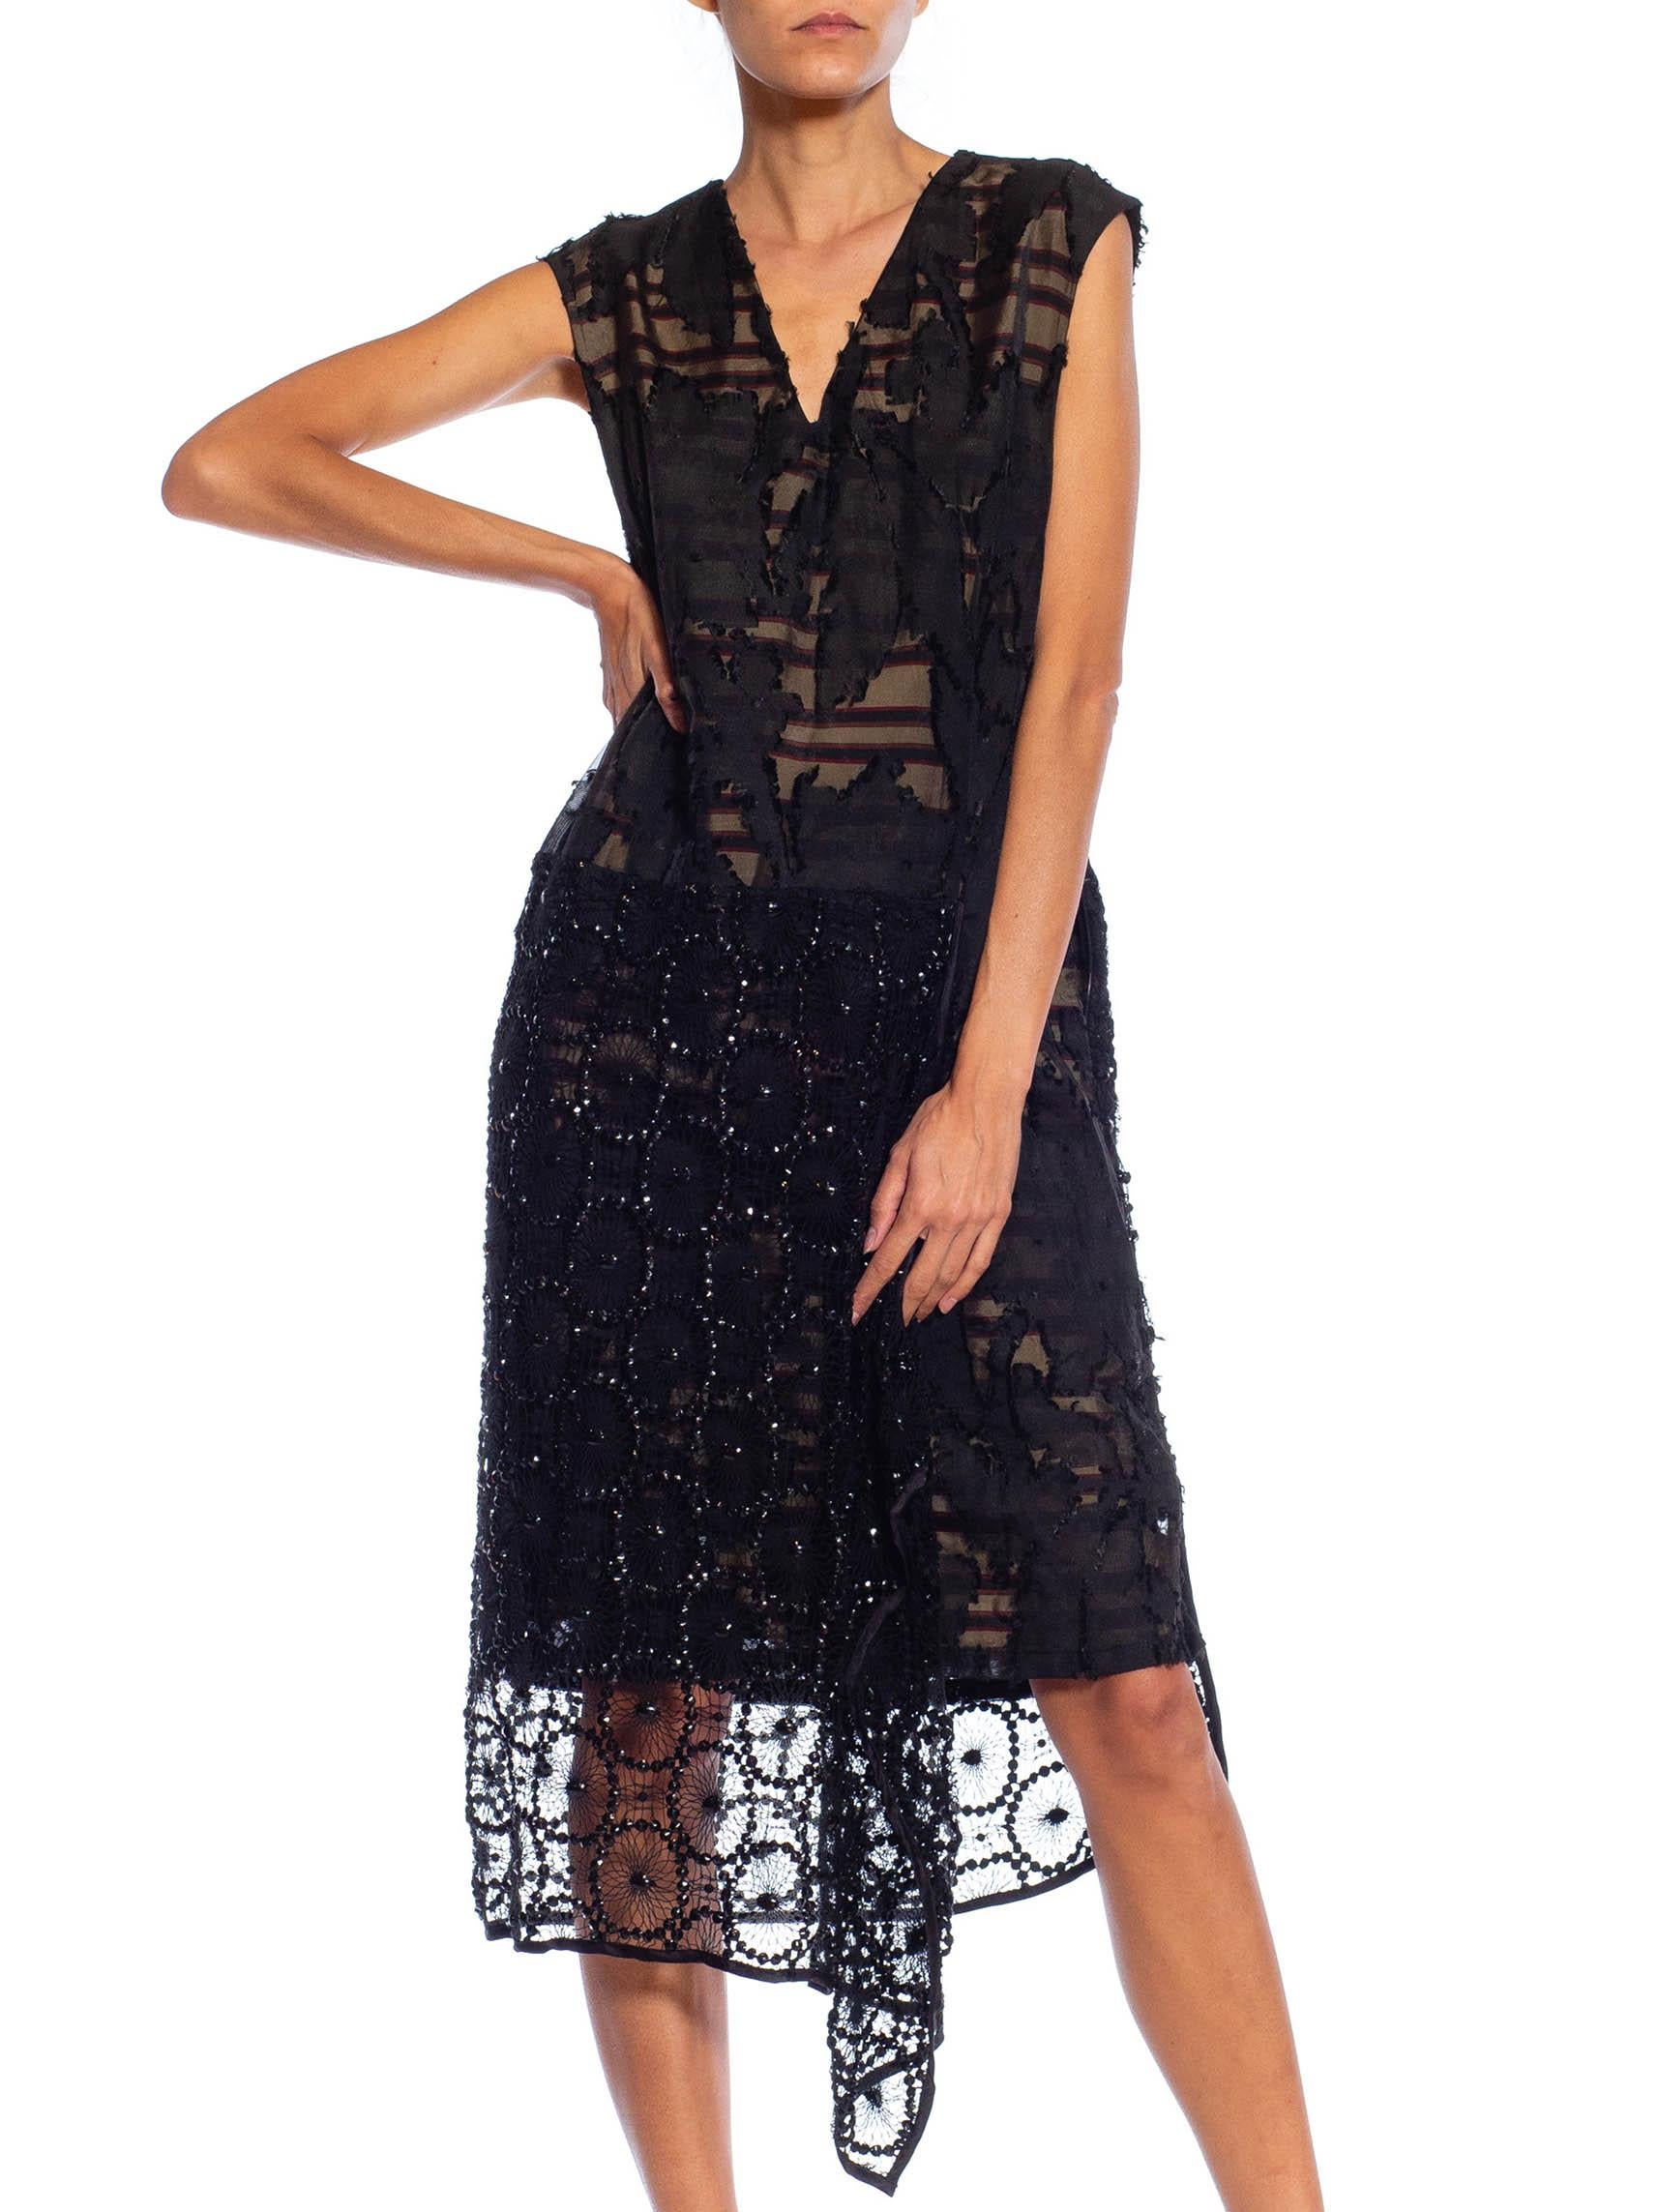 Women's 2000S DRIES VAN NOTEN Black Silk & Beaded Lace 20S Style Cocktail Dress For Sale